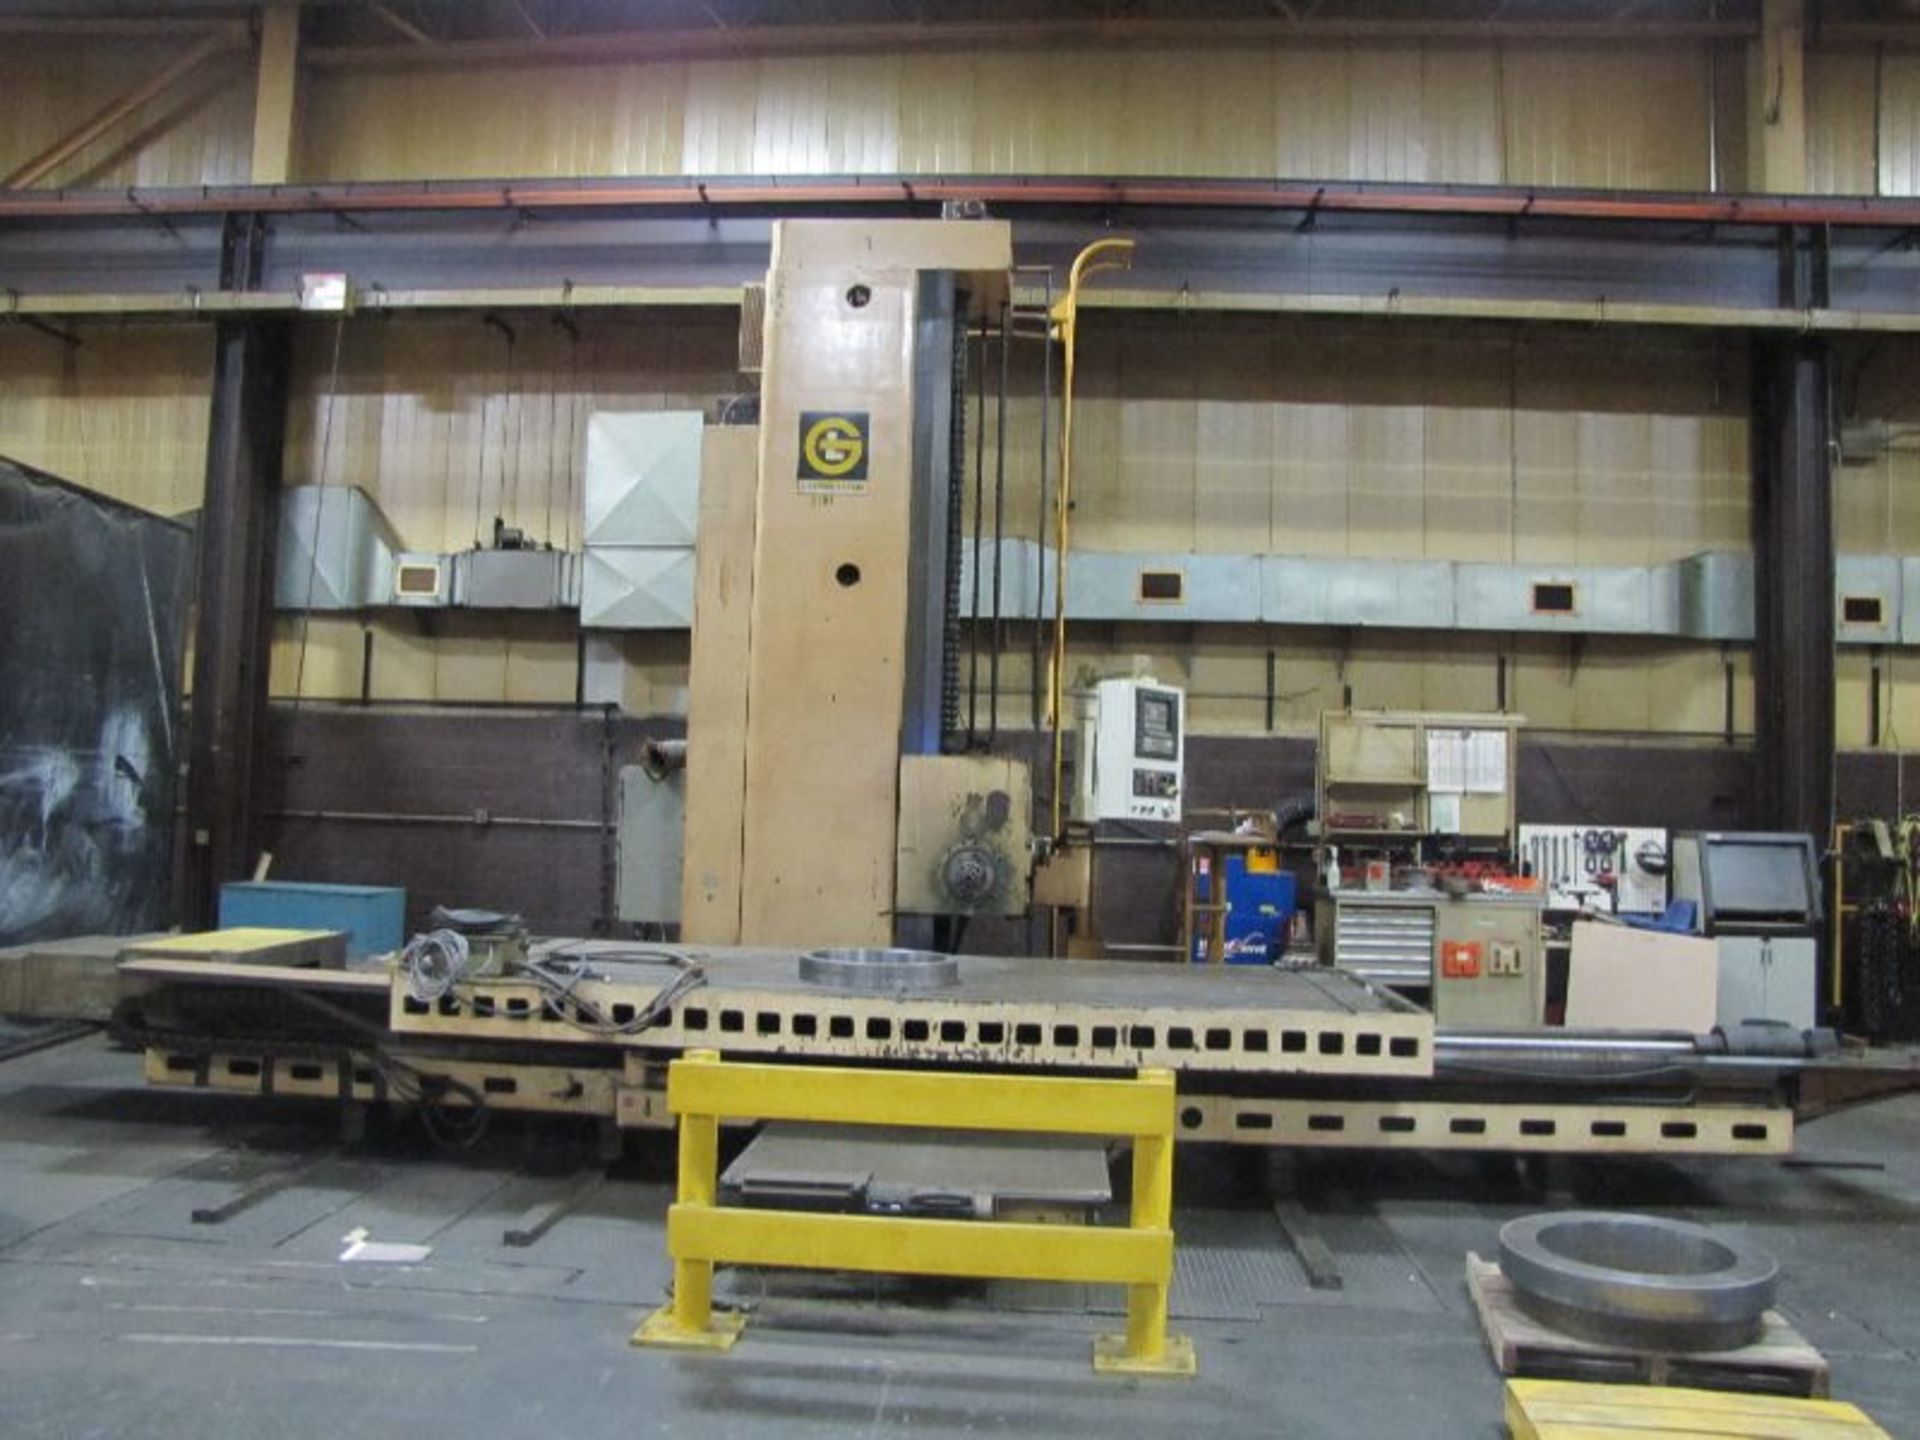 Giddings & Lewis Model H6T CNC 6” HBM, MFG.1974, Updated in 2014 with Allen Bradley 9 Series CNC Con - Image 2 of 12